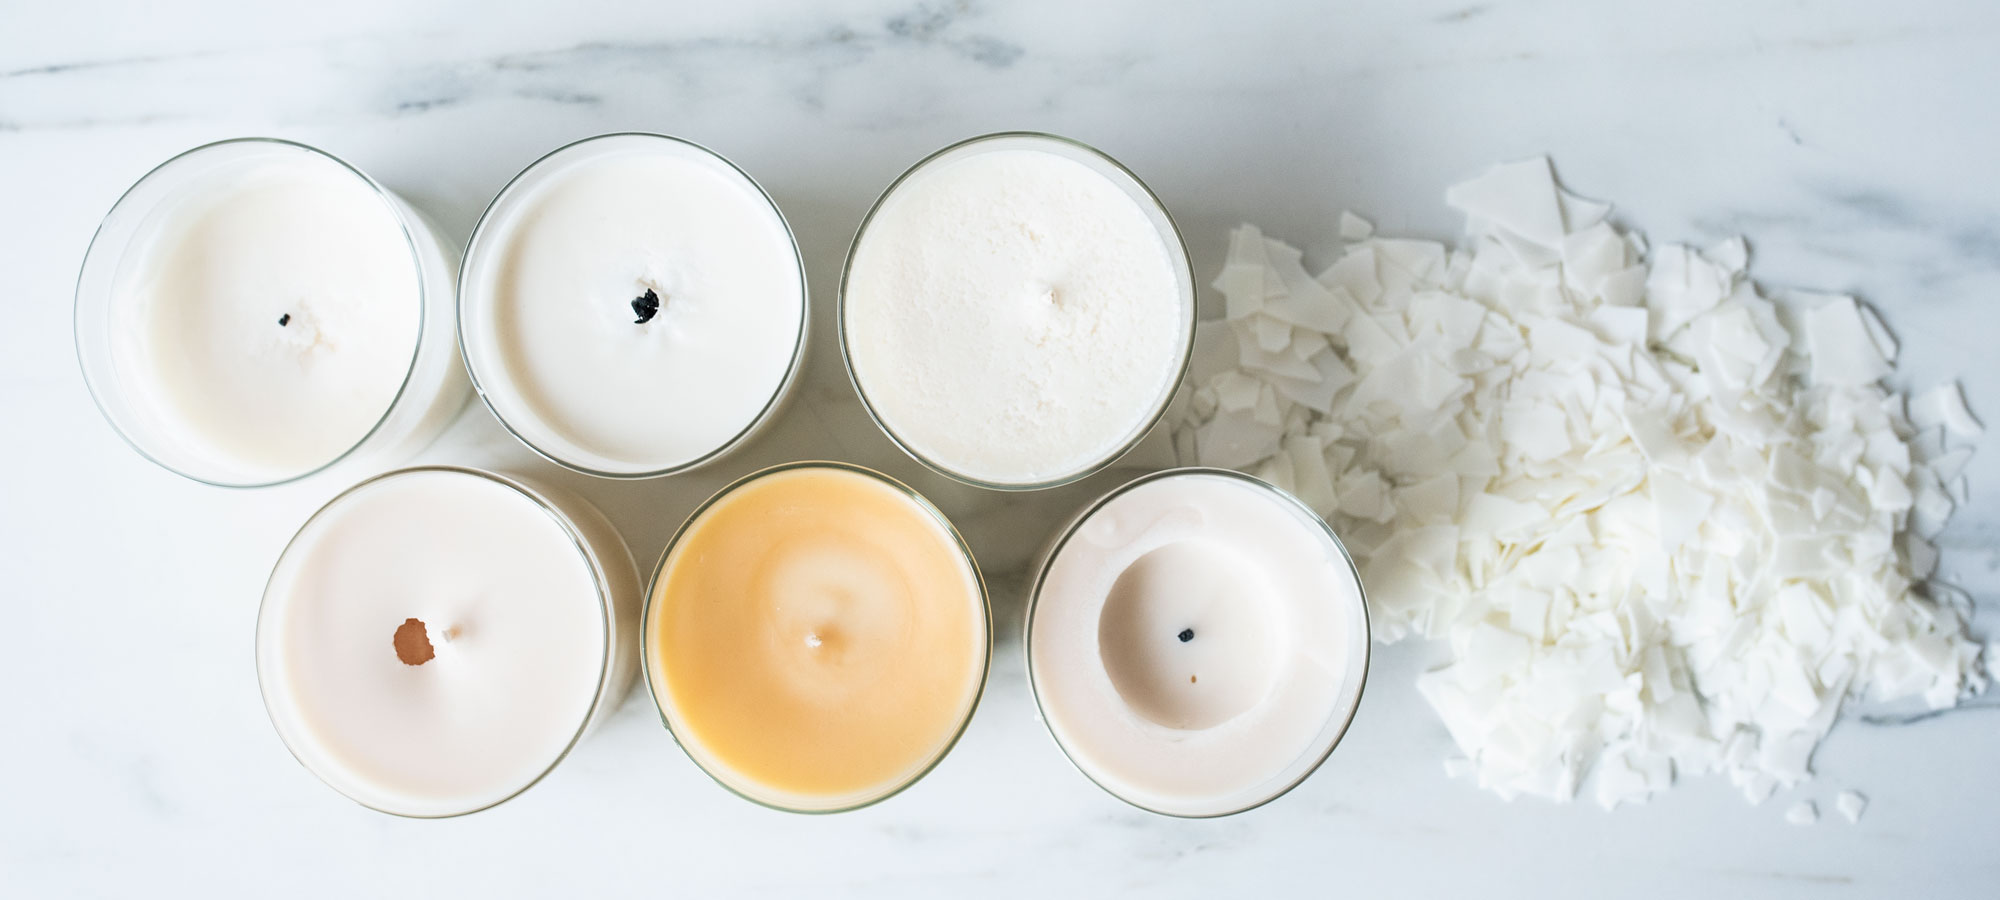 Soy Wax Trouble Shooting - Soy wax candles on table with common issues. 